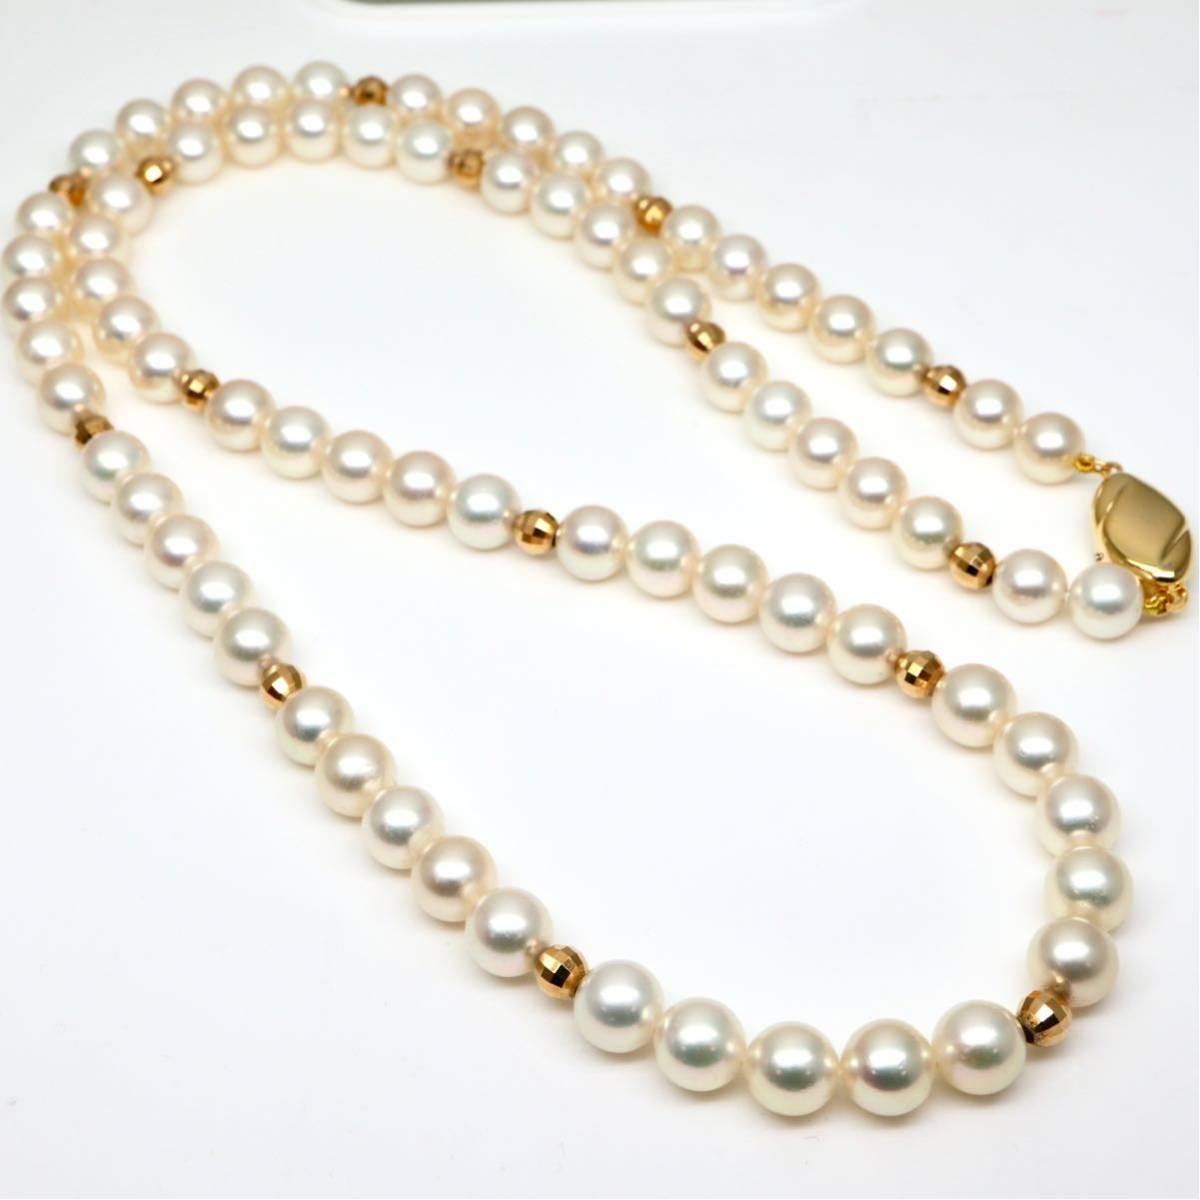 ◆K18/silverアコヤ本真珠ロングネックレス⑦◆F 約54.0g 約66.5cm 7.5-8.0.mm珠 pearl パール jewelry necklace ジュエリーEH0/ZZ_画像6